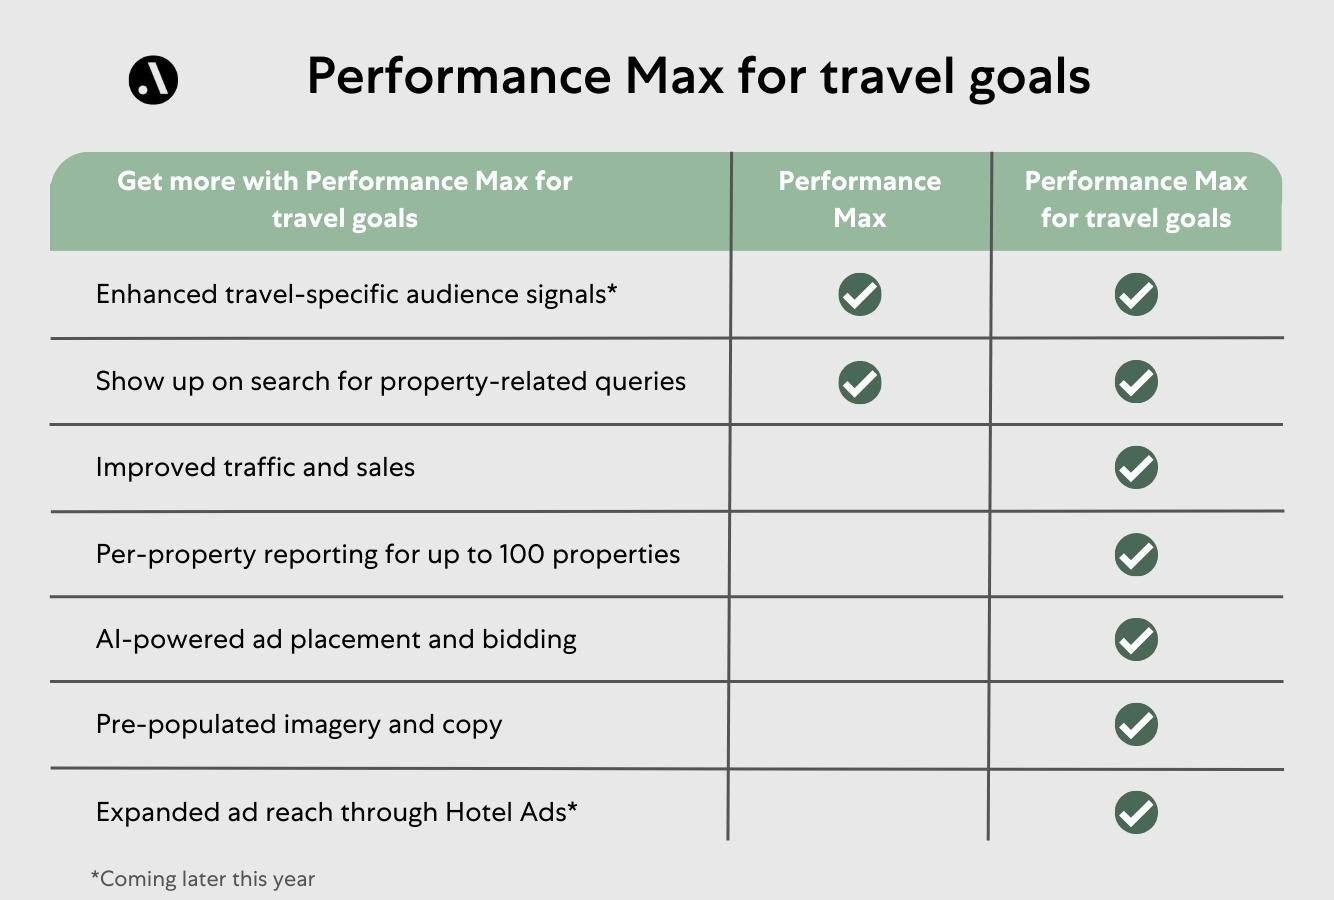 Performance Max for travel goals campaign priority